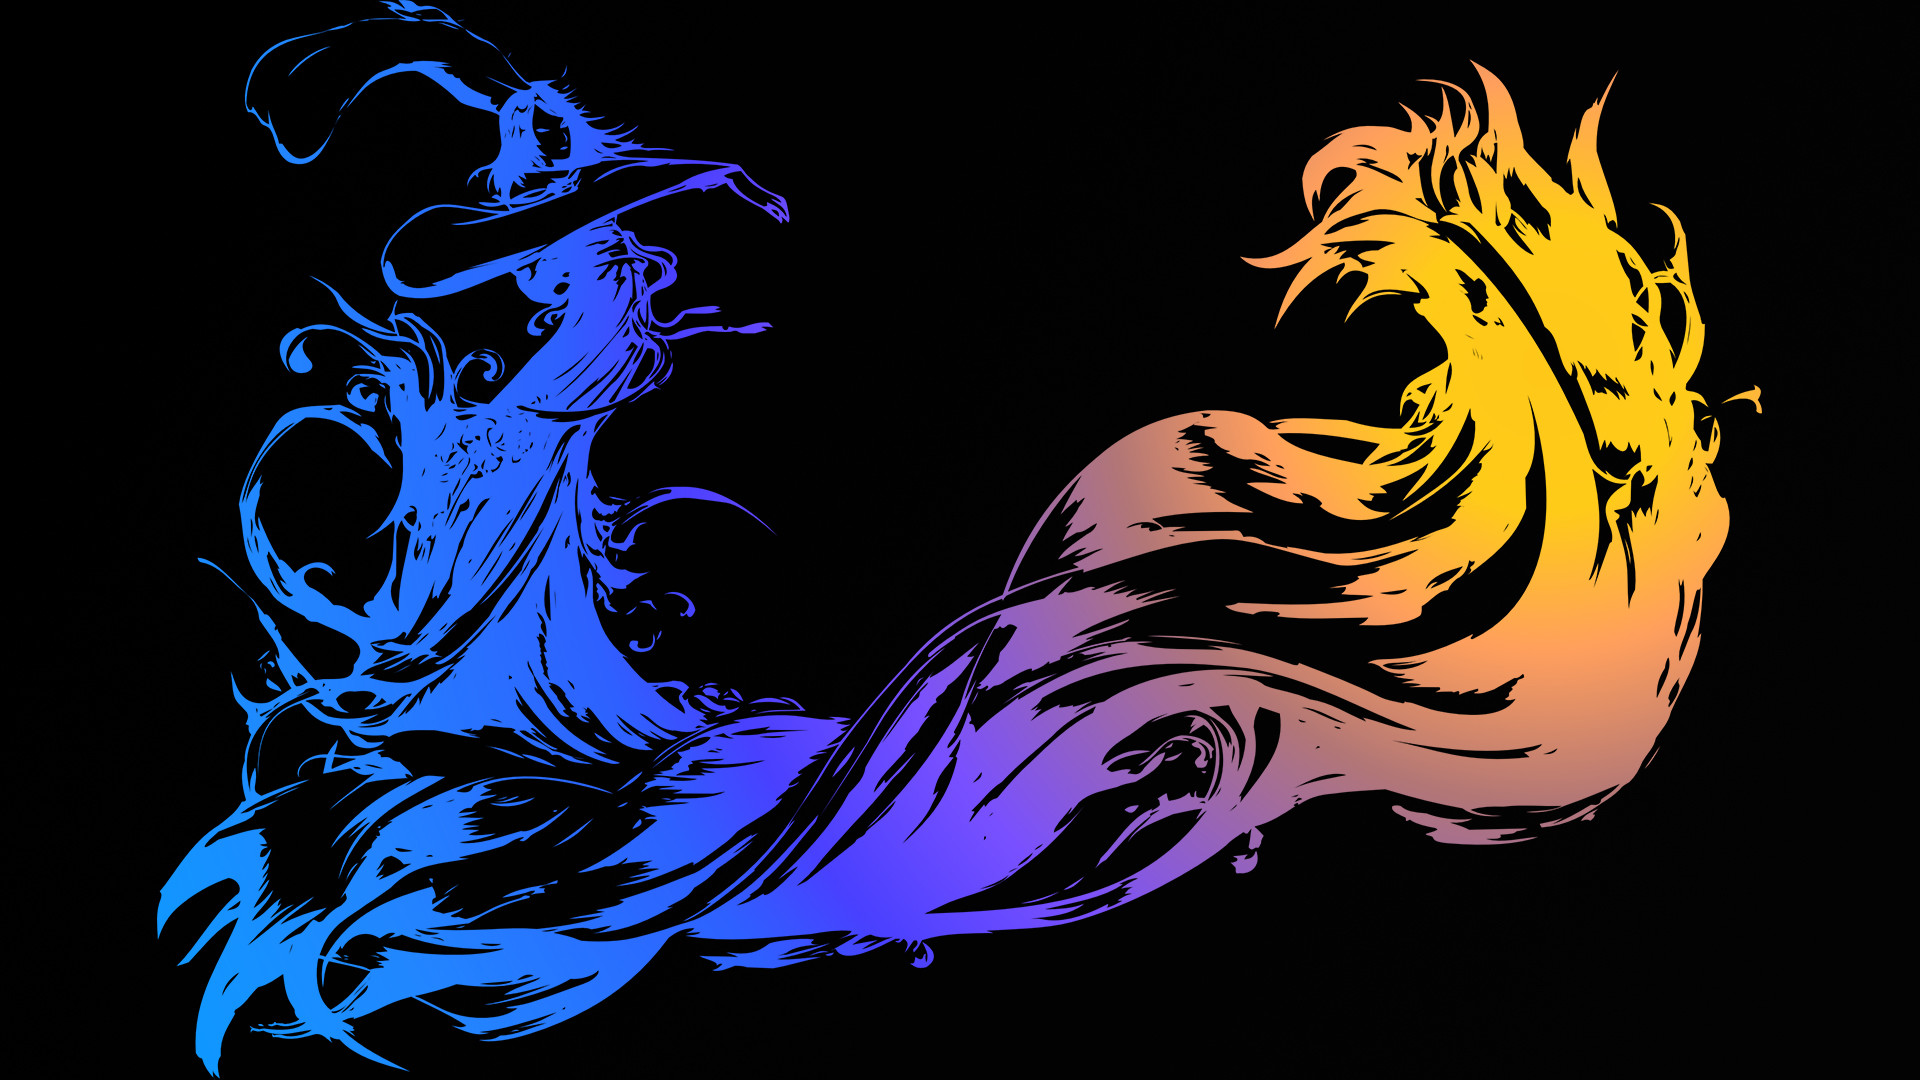 Someone requested it, so I made a Final Fantasy X wallpaper. Here it is!